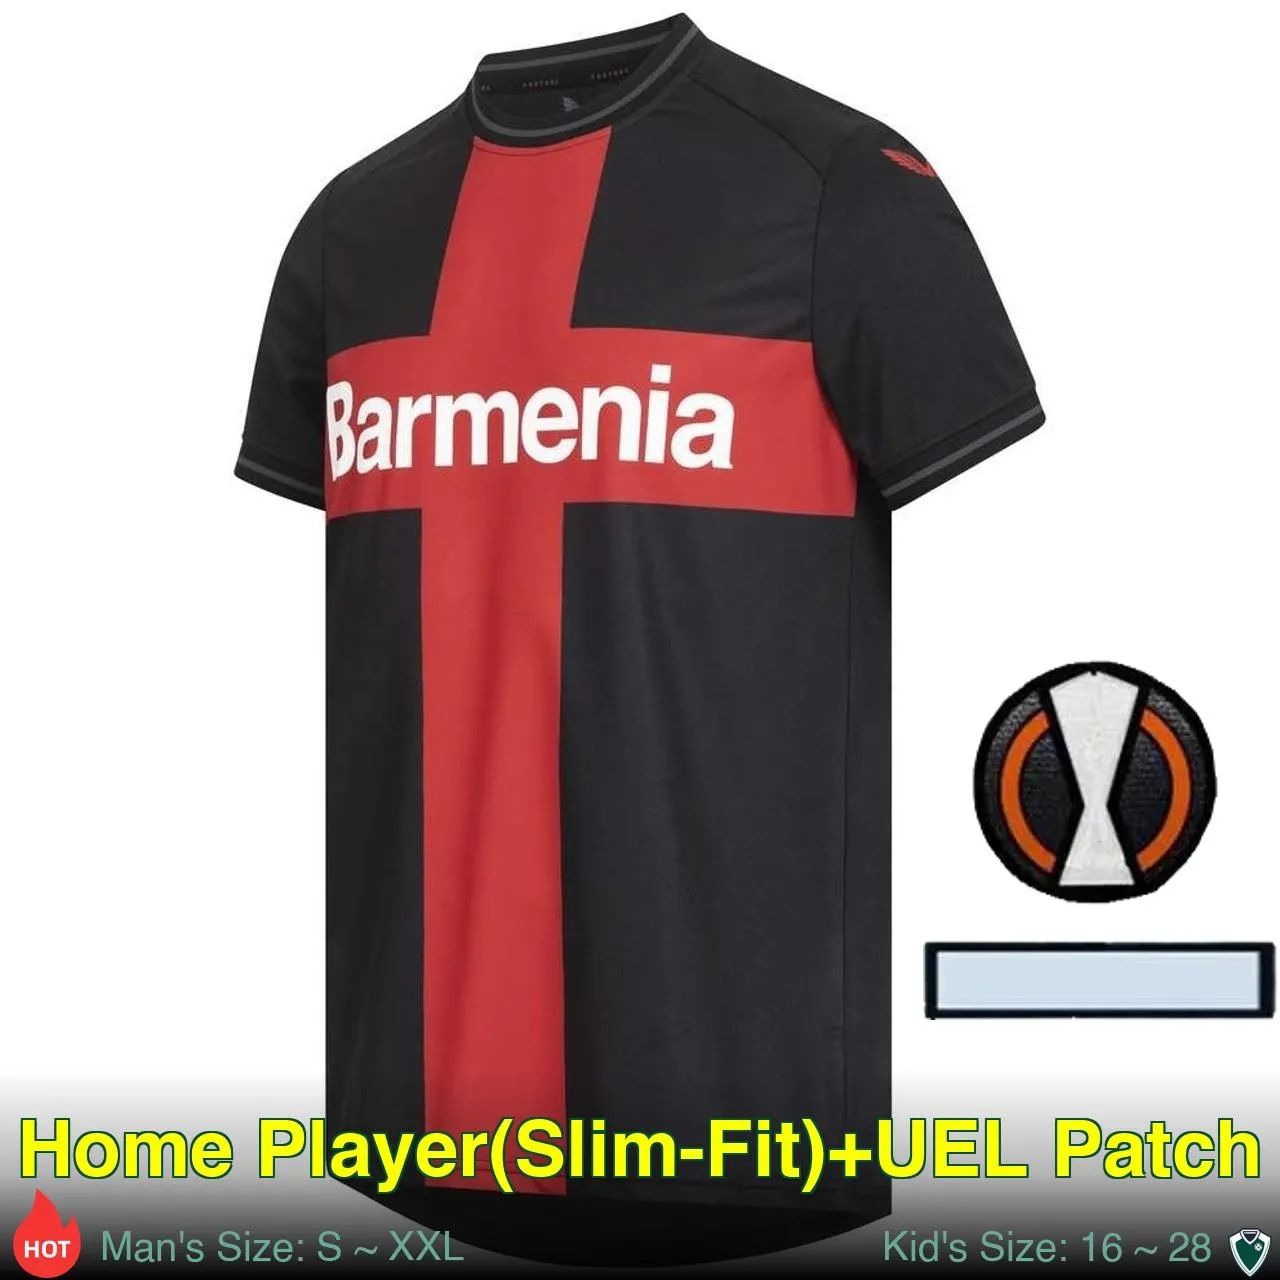 Home Player+UEL Patch